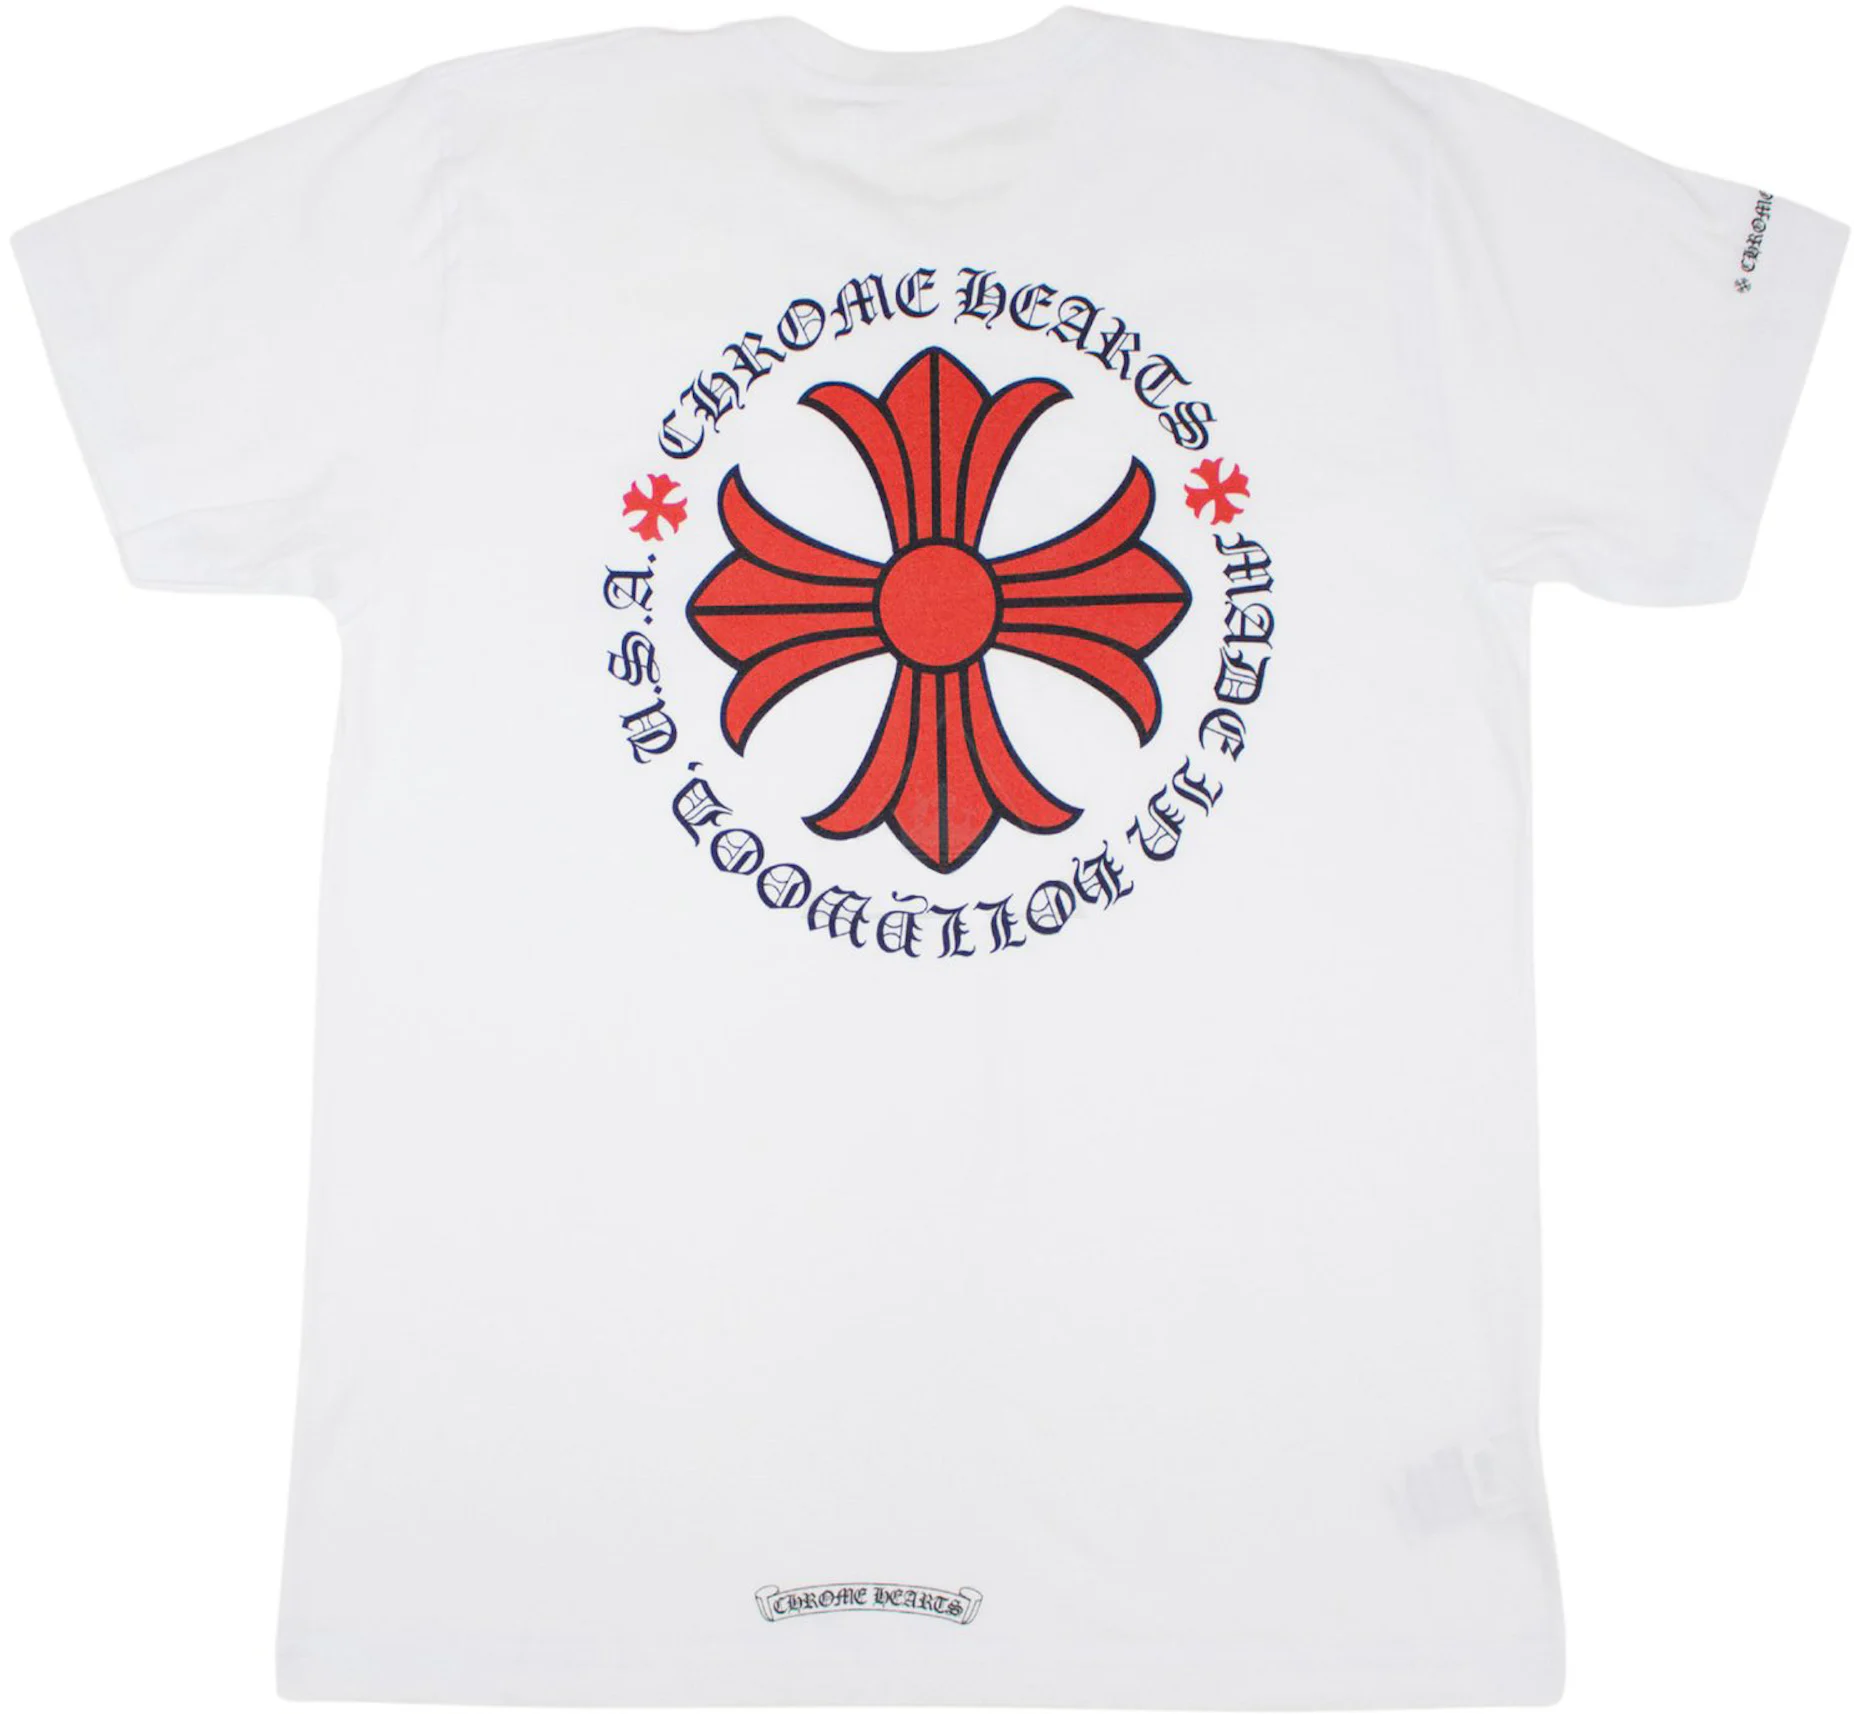 Chrome Hearts Made in Hollywood Plus Cross T-shirt White/Red Men's - US